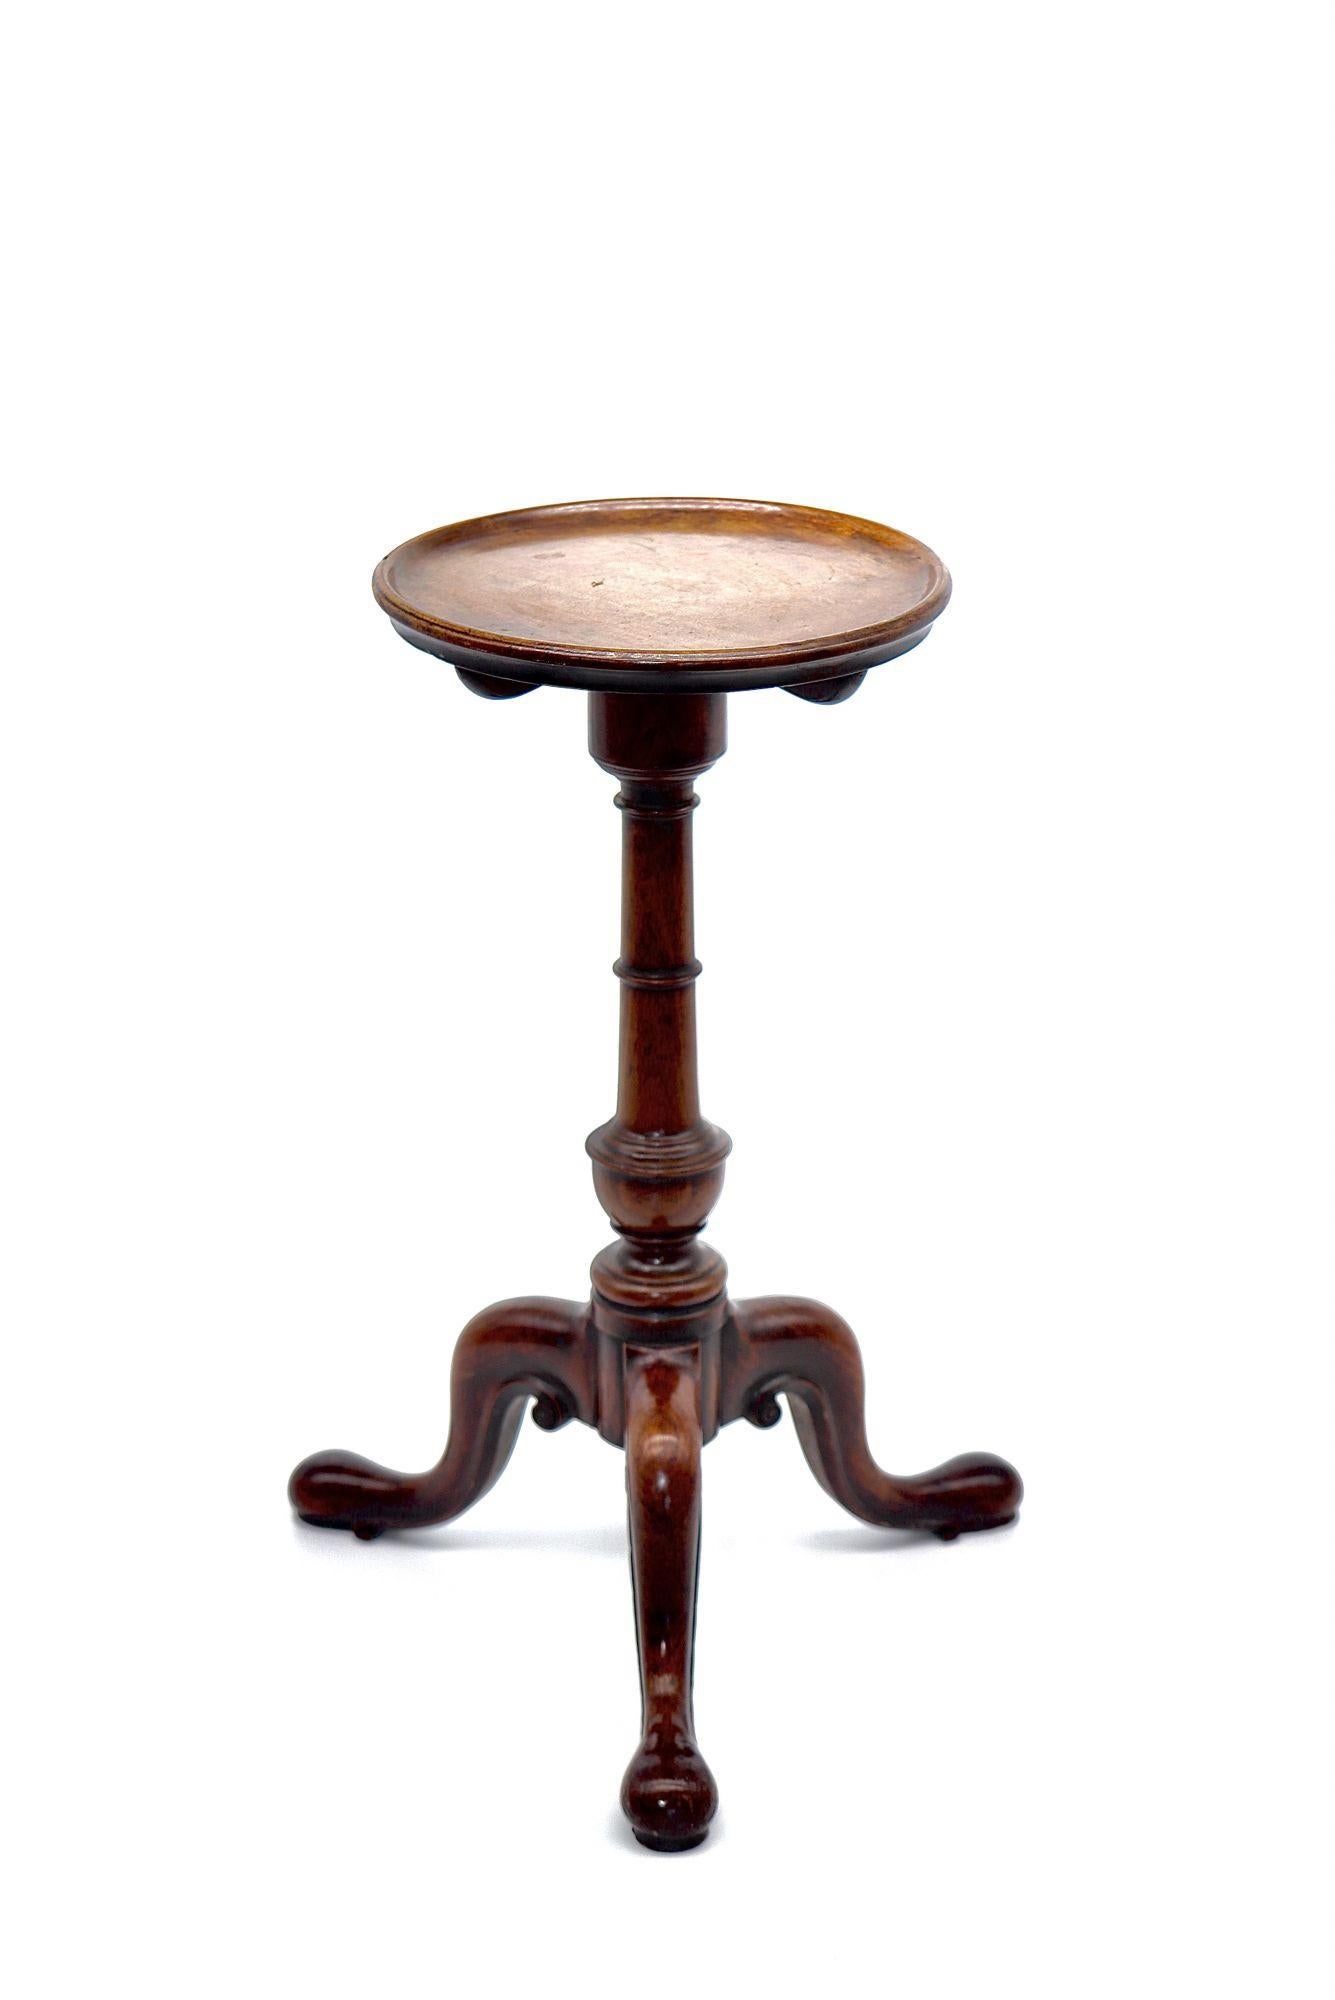 Irish well figured circular dish top raised on elegant turned stem and carved scrolling tripod legs. The Kettle stand table is small circular or square table for holding a teakettle or hot-water urn. We like to use them as drink tables.